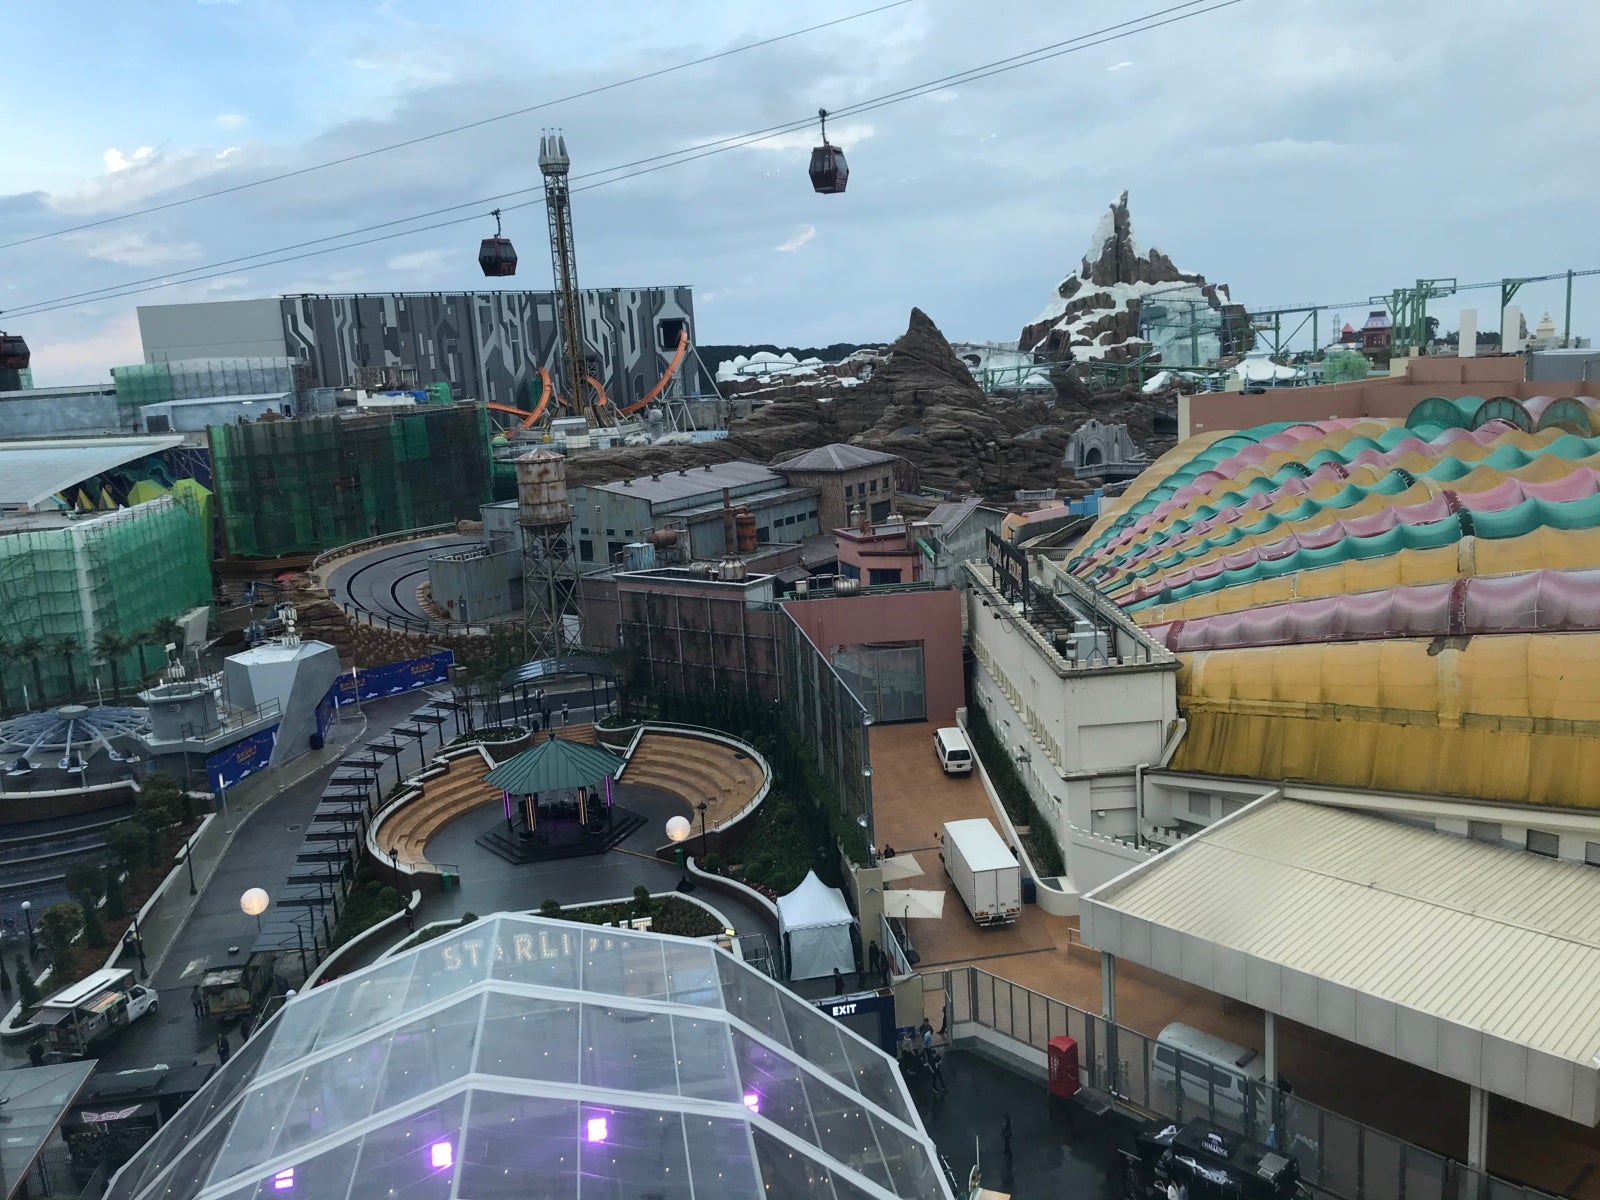 Report: Genting Outdoor Theme Park Mostly Complete, Finally Set to Open in Q3 2020! - WORLD OF BUZZ